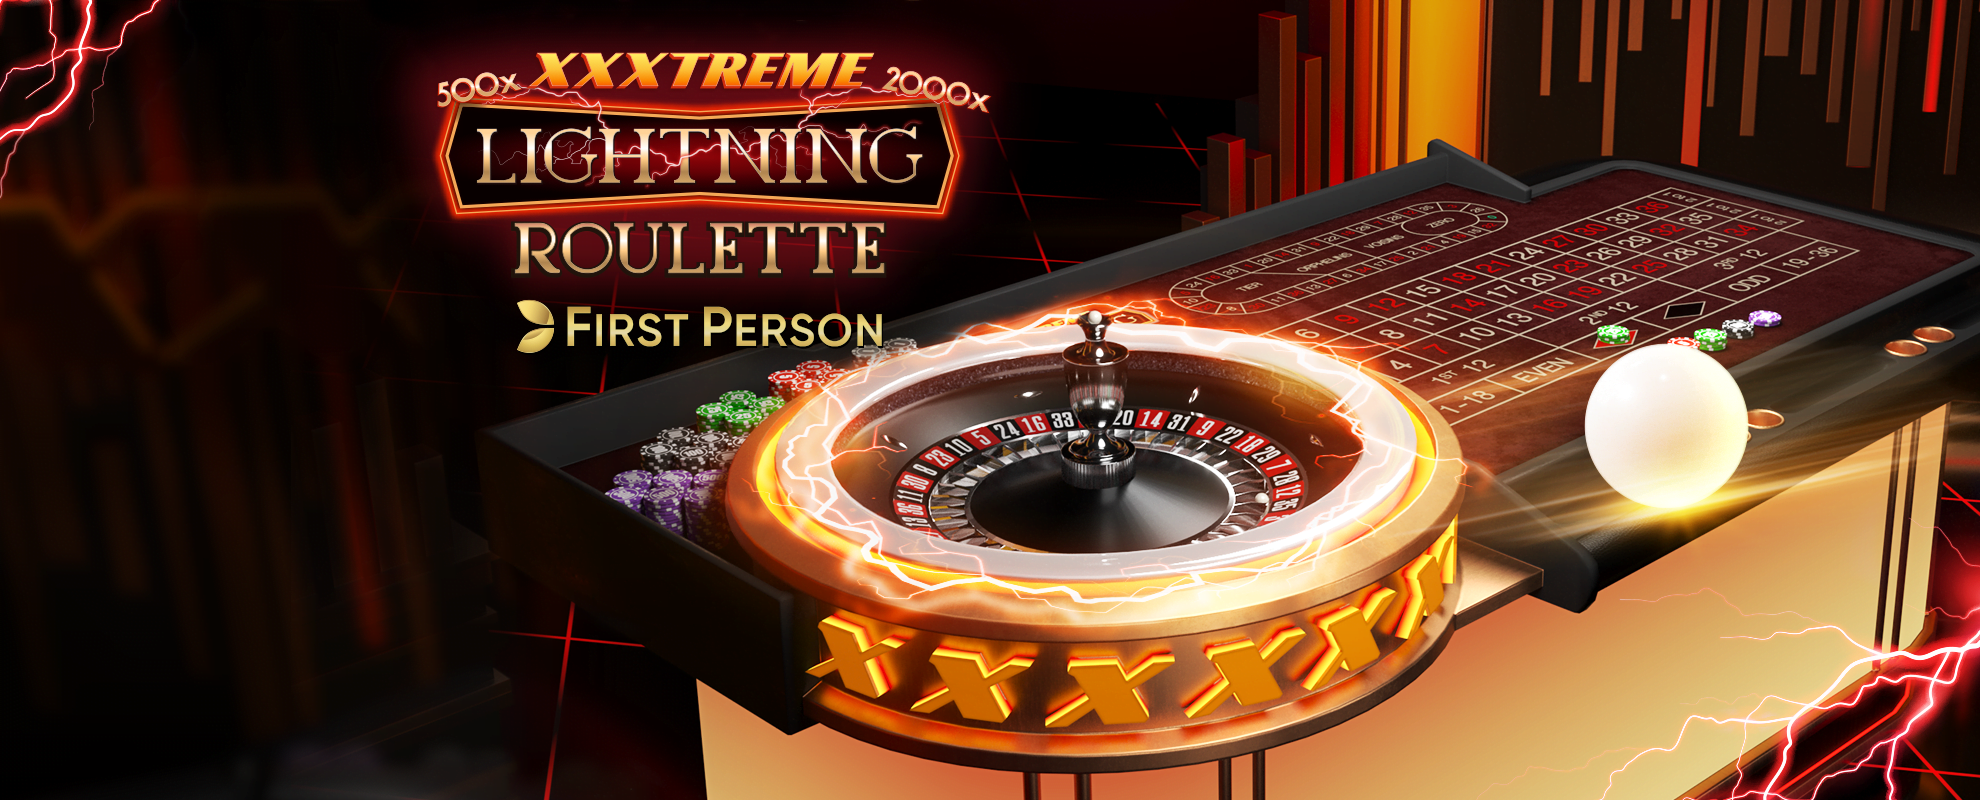 First Person XXXtreme Lightning Roulette By Evolution